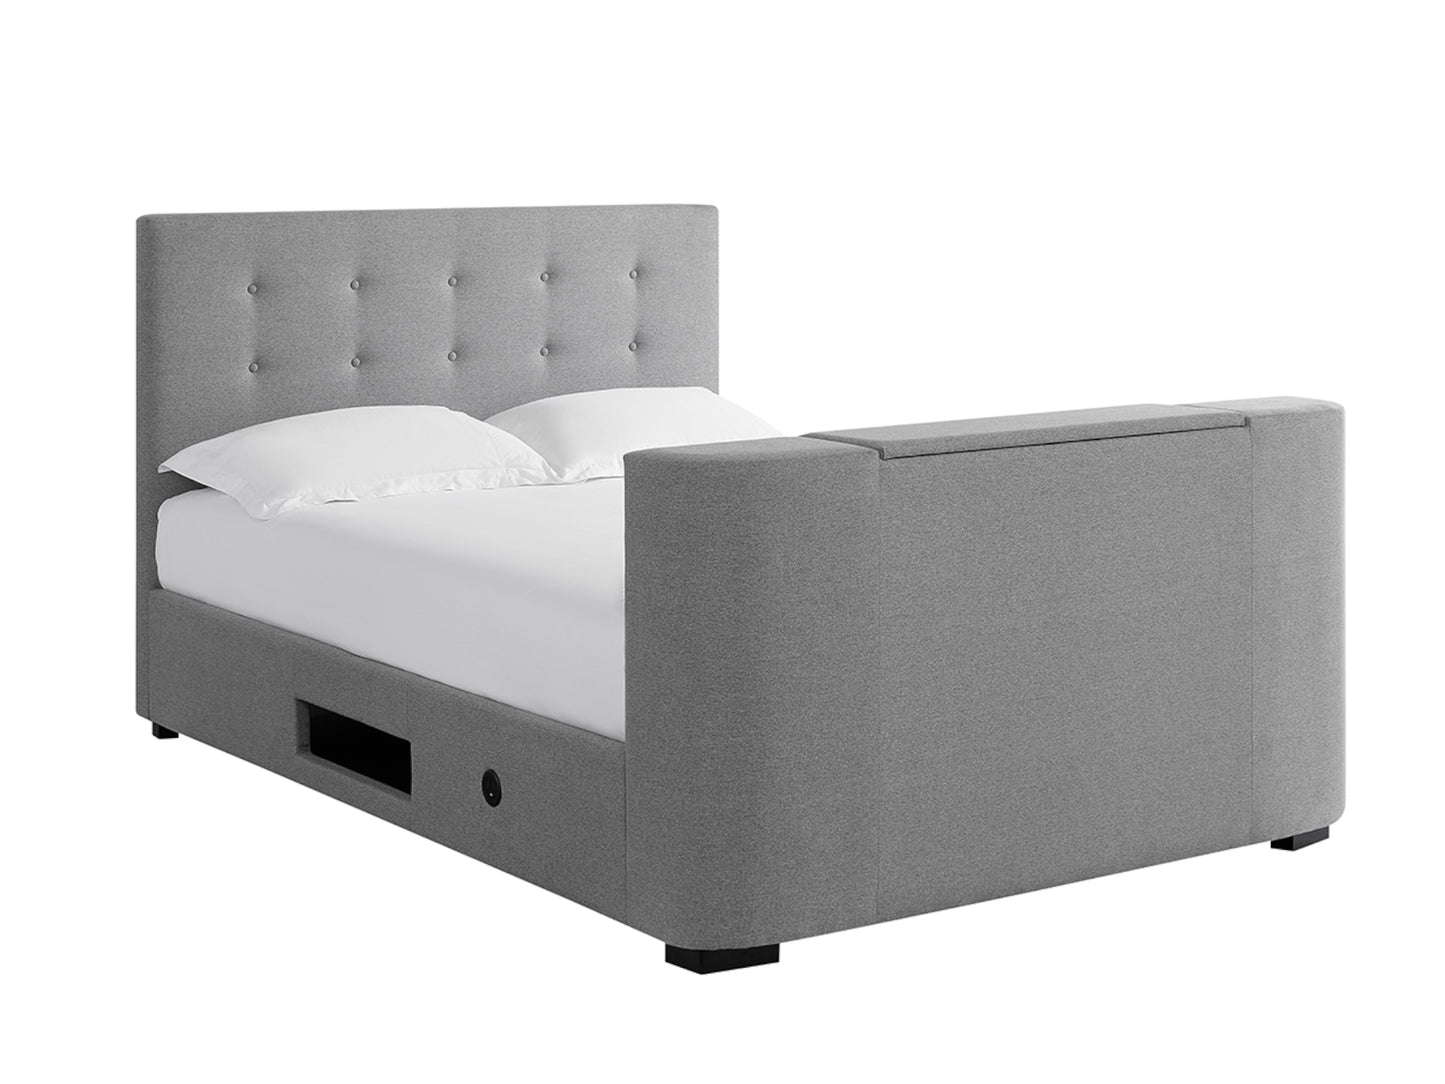 Mayfair TV Bed Frame in Grey Flannel